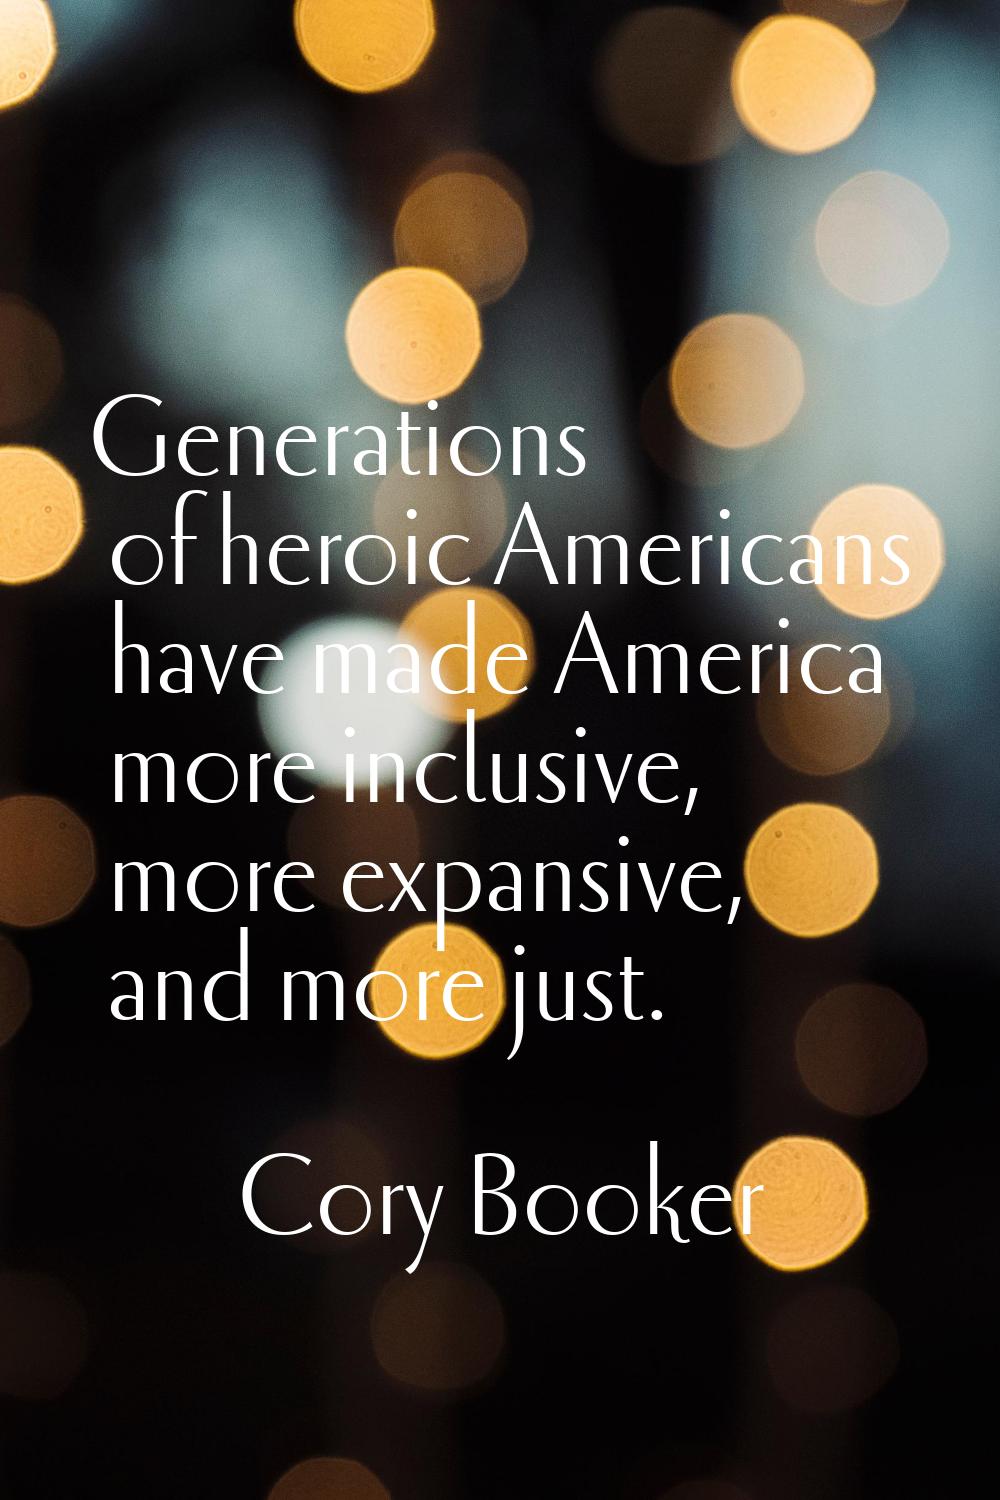 Generations of heroic Americans have made America more inclusive, more expansive, and more just.